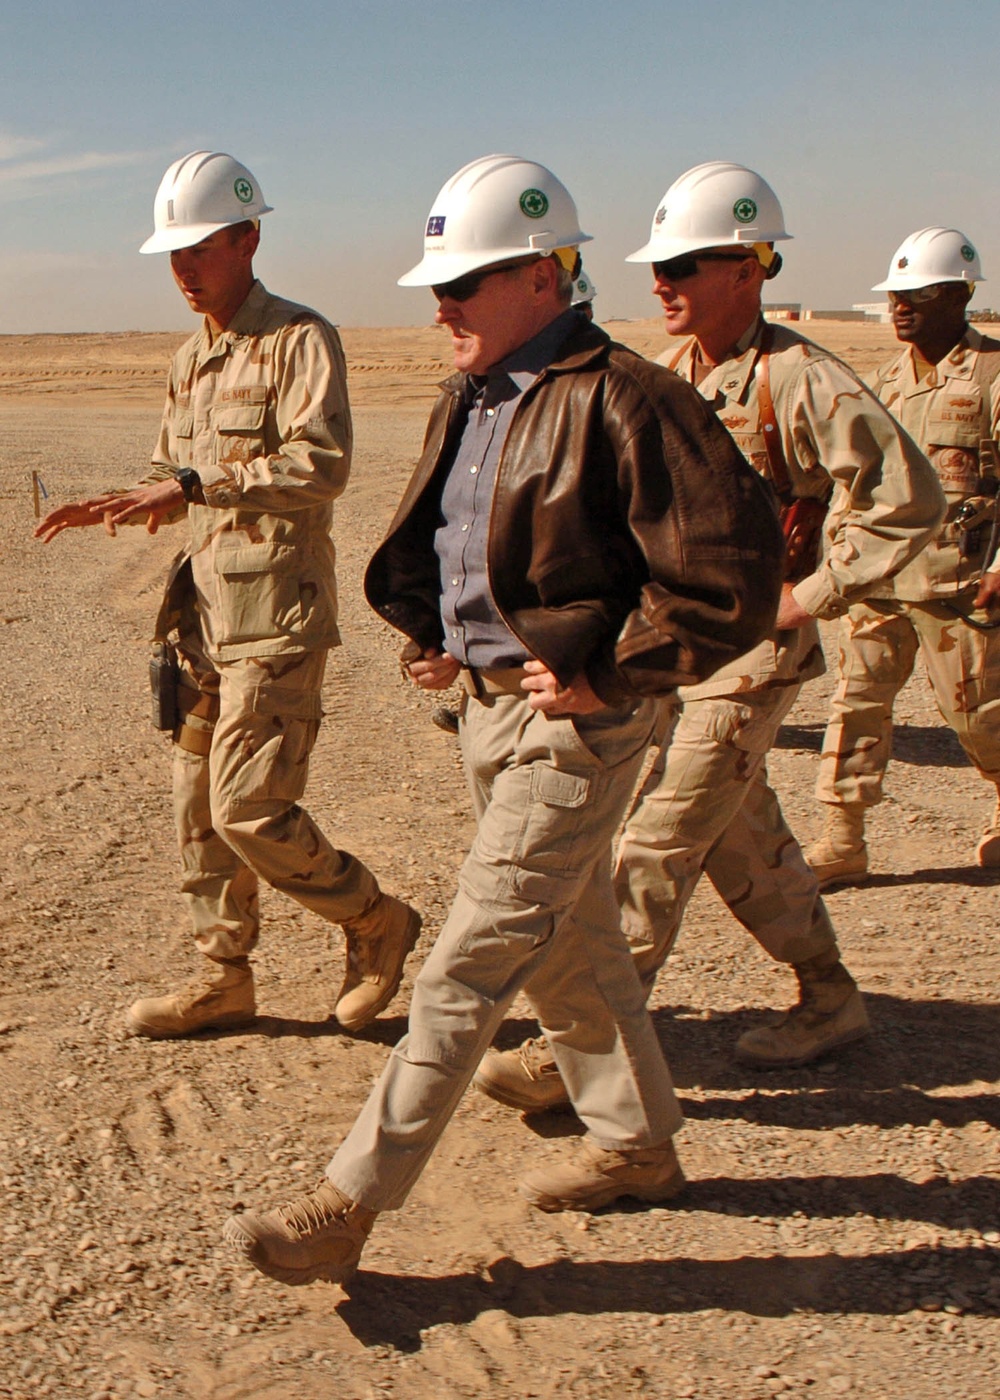 Secretary of the Navy Ray Mabus Visits Seabees in Afghanistan